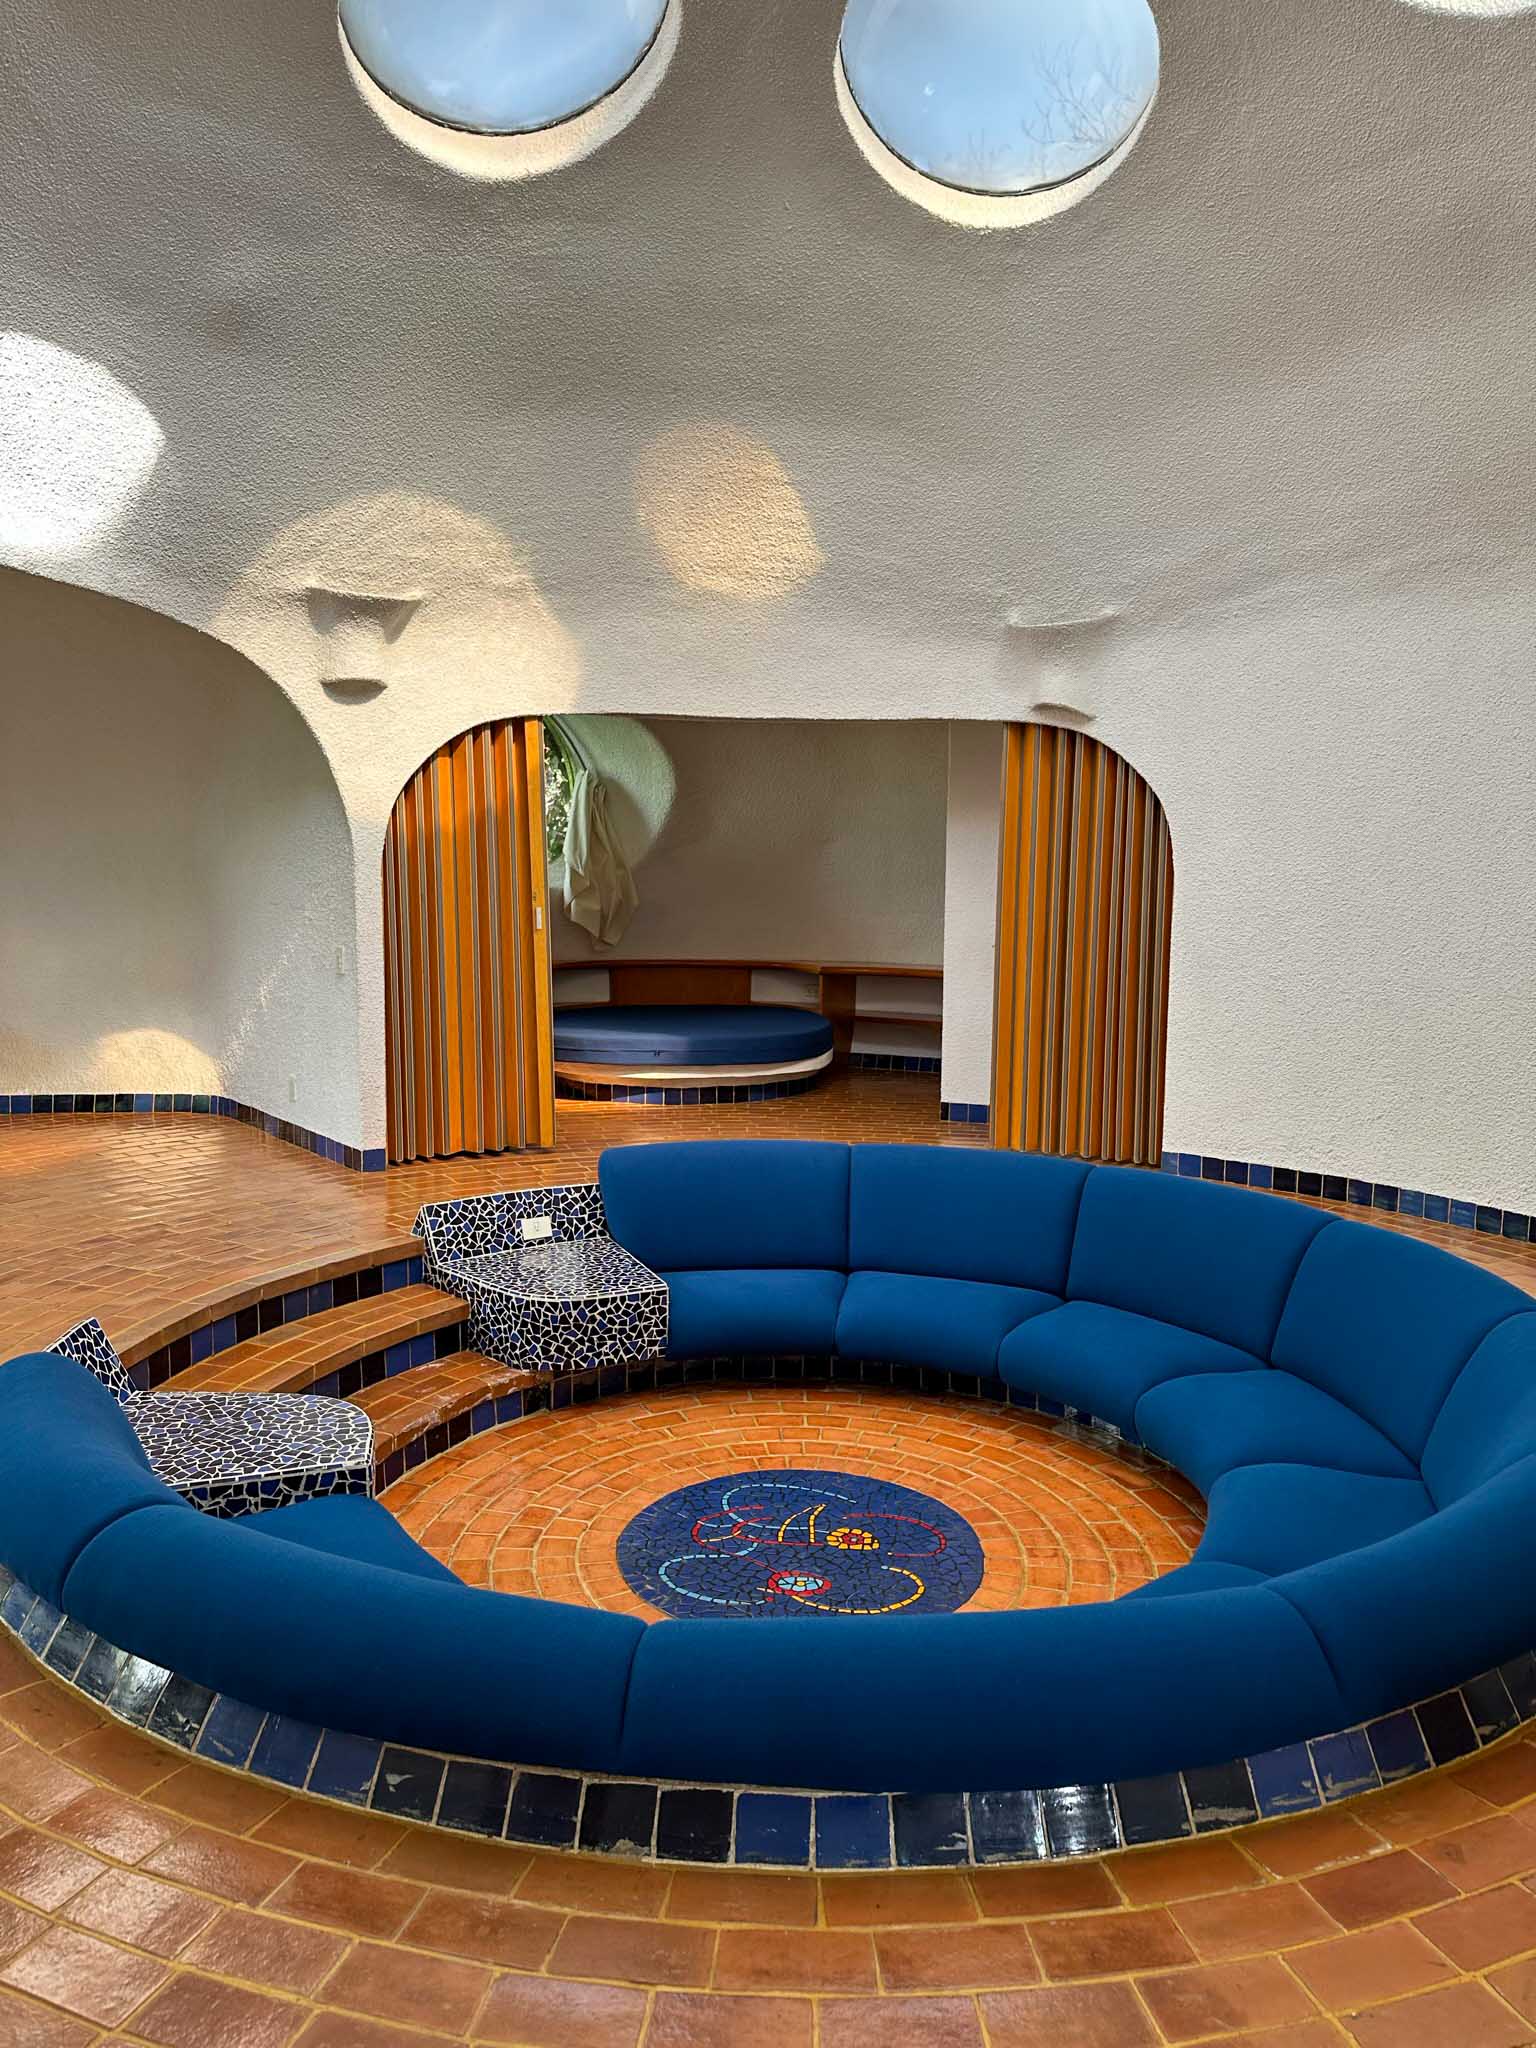 Interior view of a residence at Conjunto Satelite, featuring a rotund sofa surrounding a communal gathering area